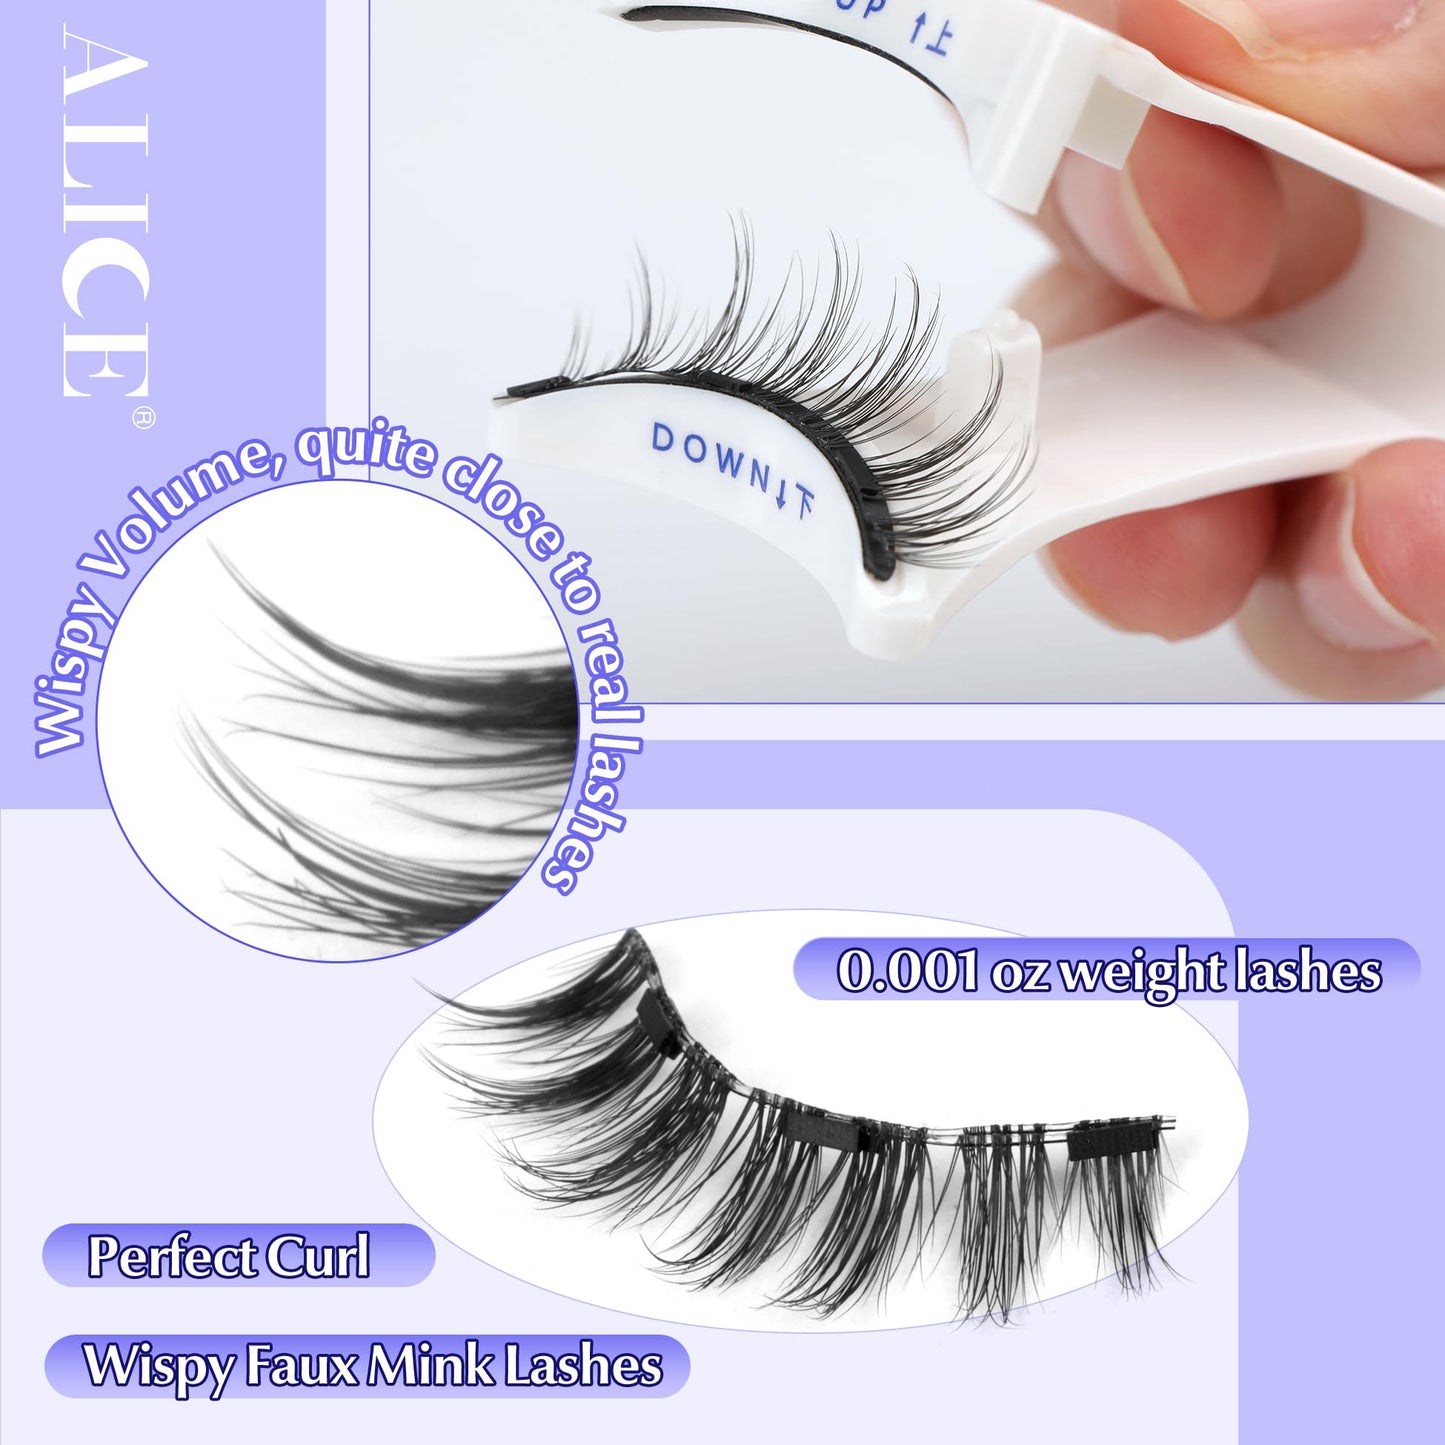 ALICE Magnetic Eyelashes with Applicator, Reusable Natural Manga Magnetic Lashes Kit, No Glue Needed Eyelashes with Magnets, Easy to Wear and Remove for All-Day Comfort